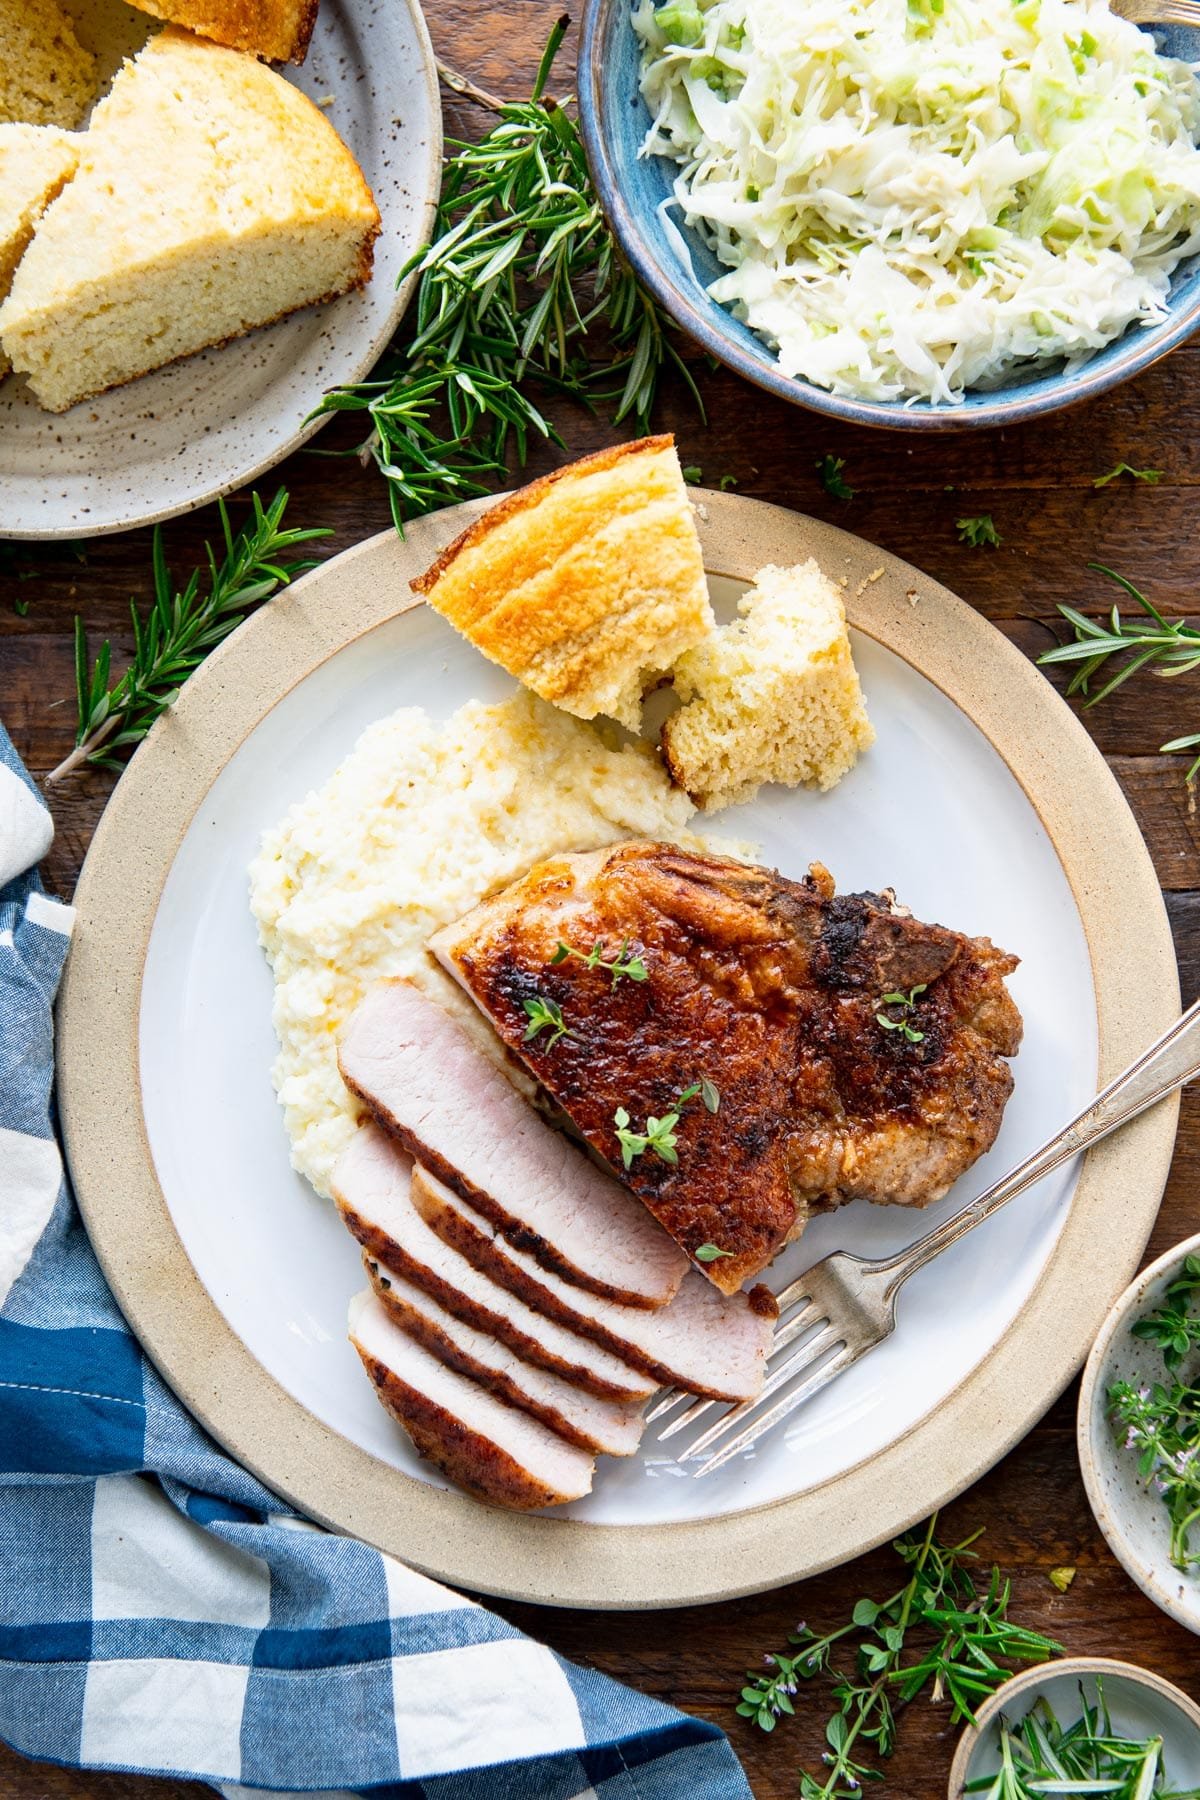 Overhead image of a plate of Cajun pork chops sliced and served with grits.